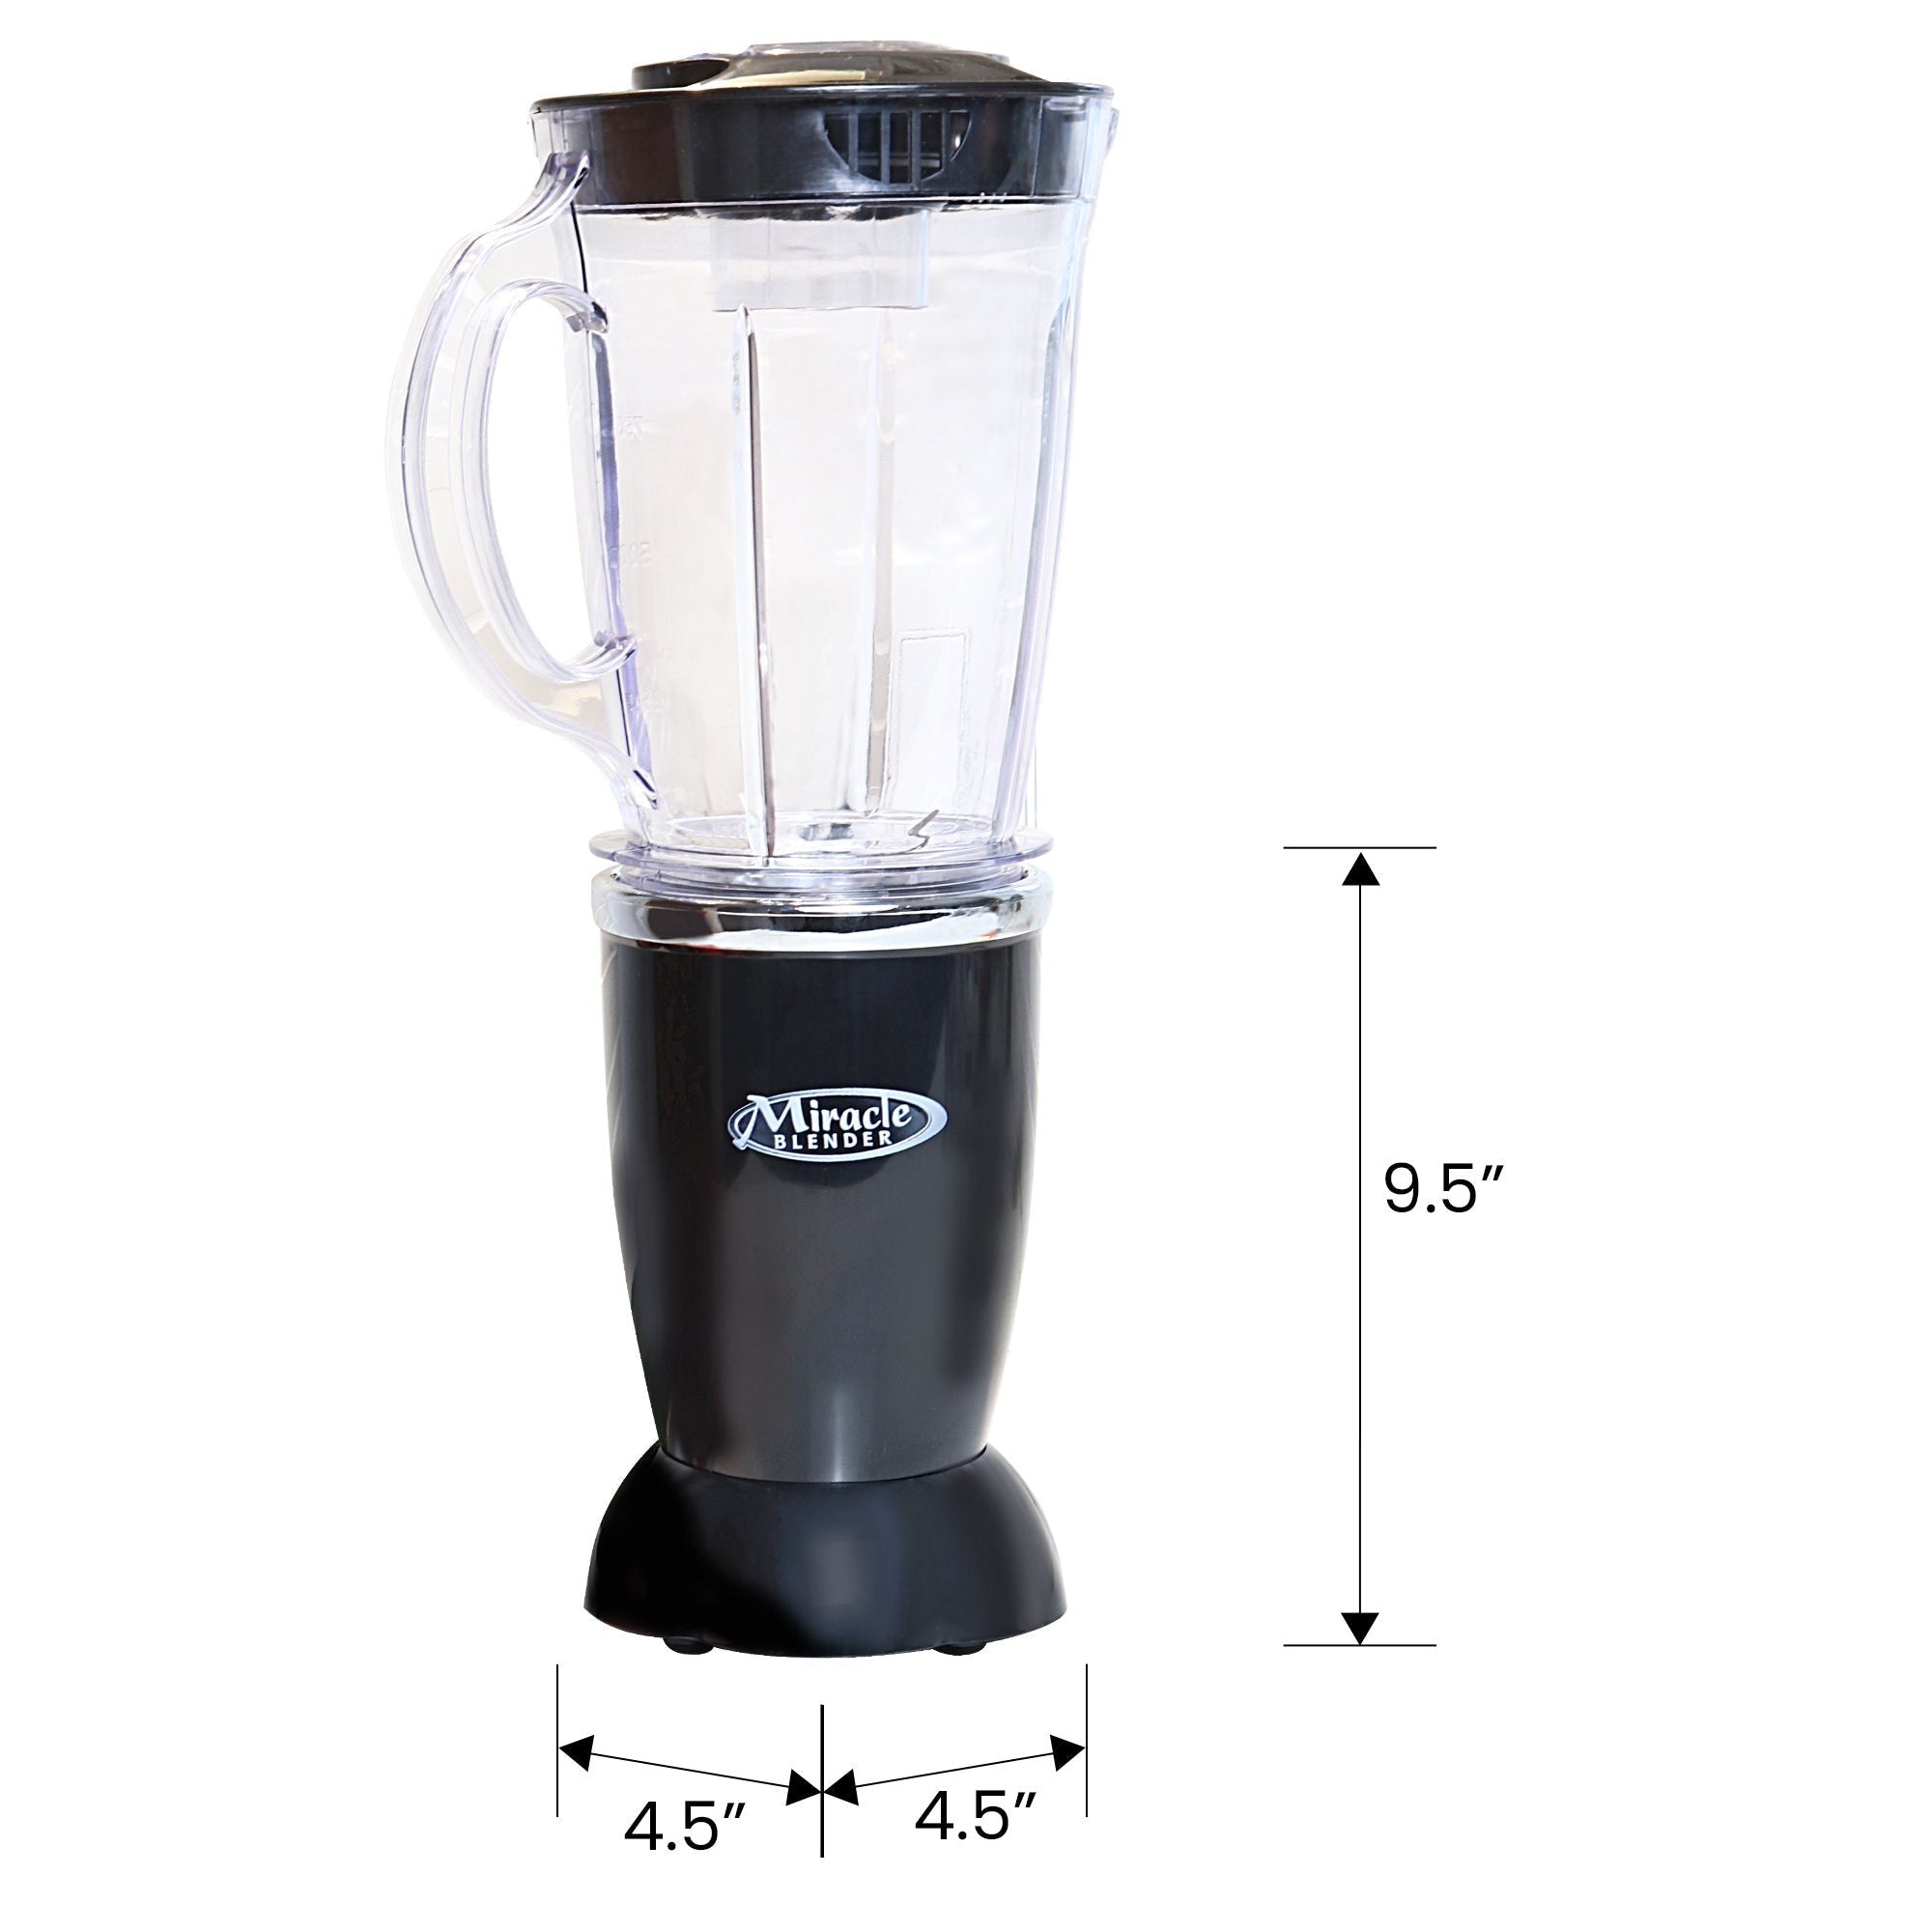 Product shot of blender on white background with dimensions